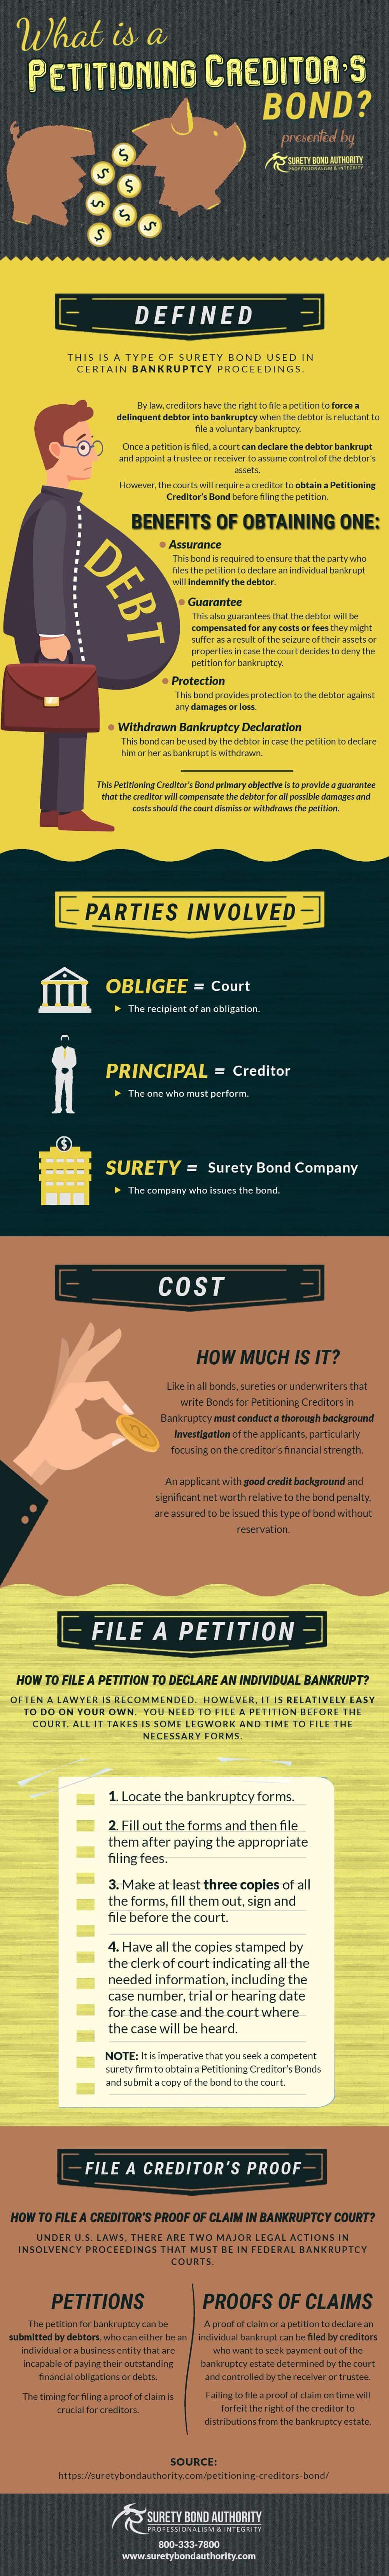 Petitioning Creditor’s Bond Infographic